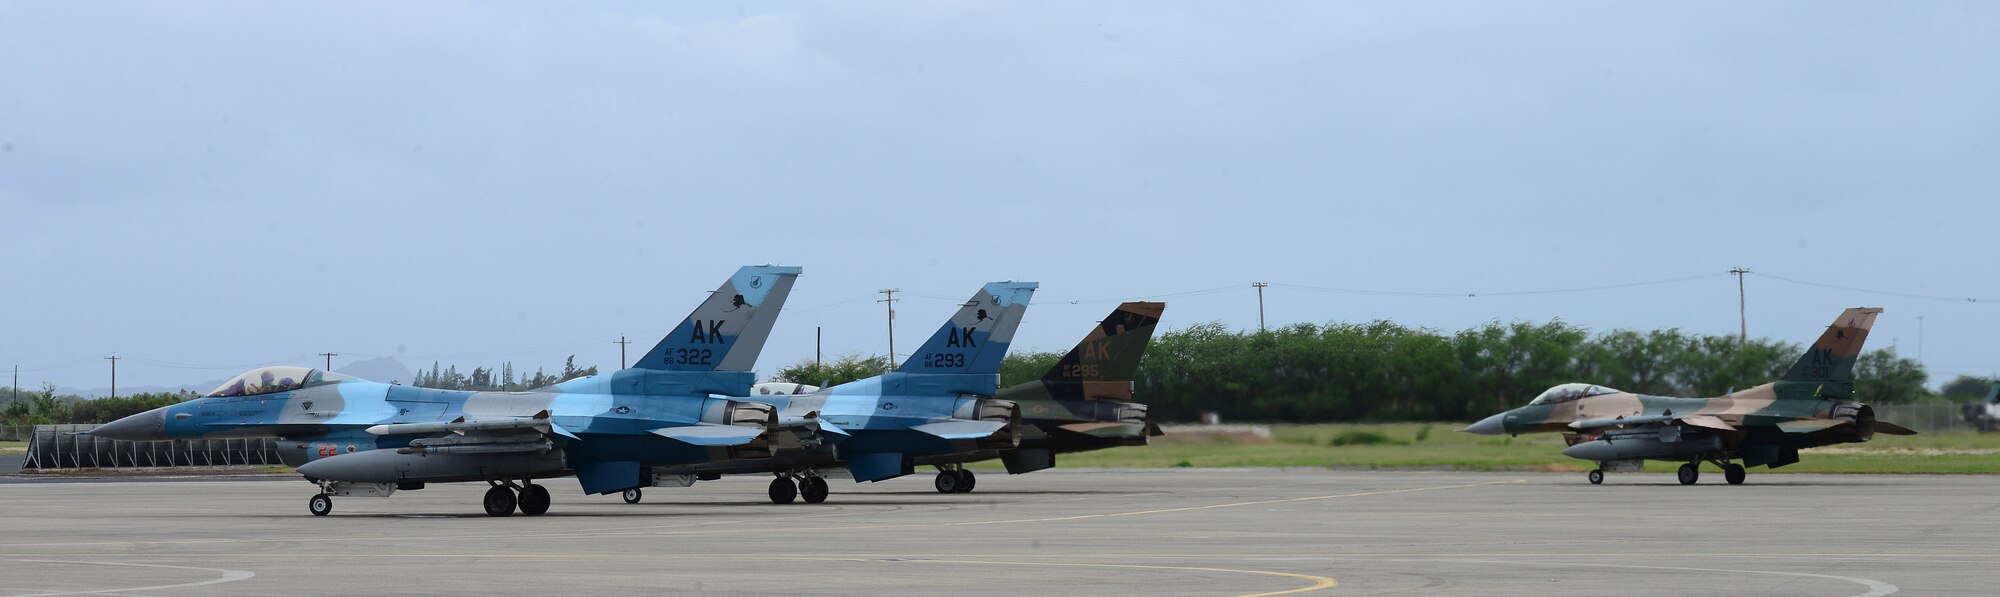 F-16 Fighting Falcons, assigned to the 18th Aggressor Squadron, stage prior to take-off during Sentry Aloha 20-1 on Joint Base Pearl Harbor-Hickam, Jan. 14, 2020. This iteration of the exercise involves approximately 1,000 personnel and 35 aircraft from 11 states. (U.S. Air Force photo by Staff Sgt. Sean Martin)